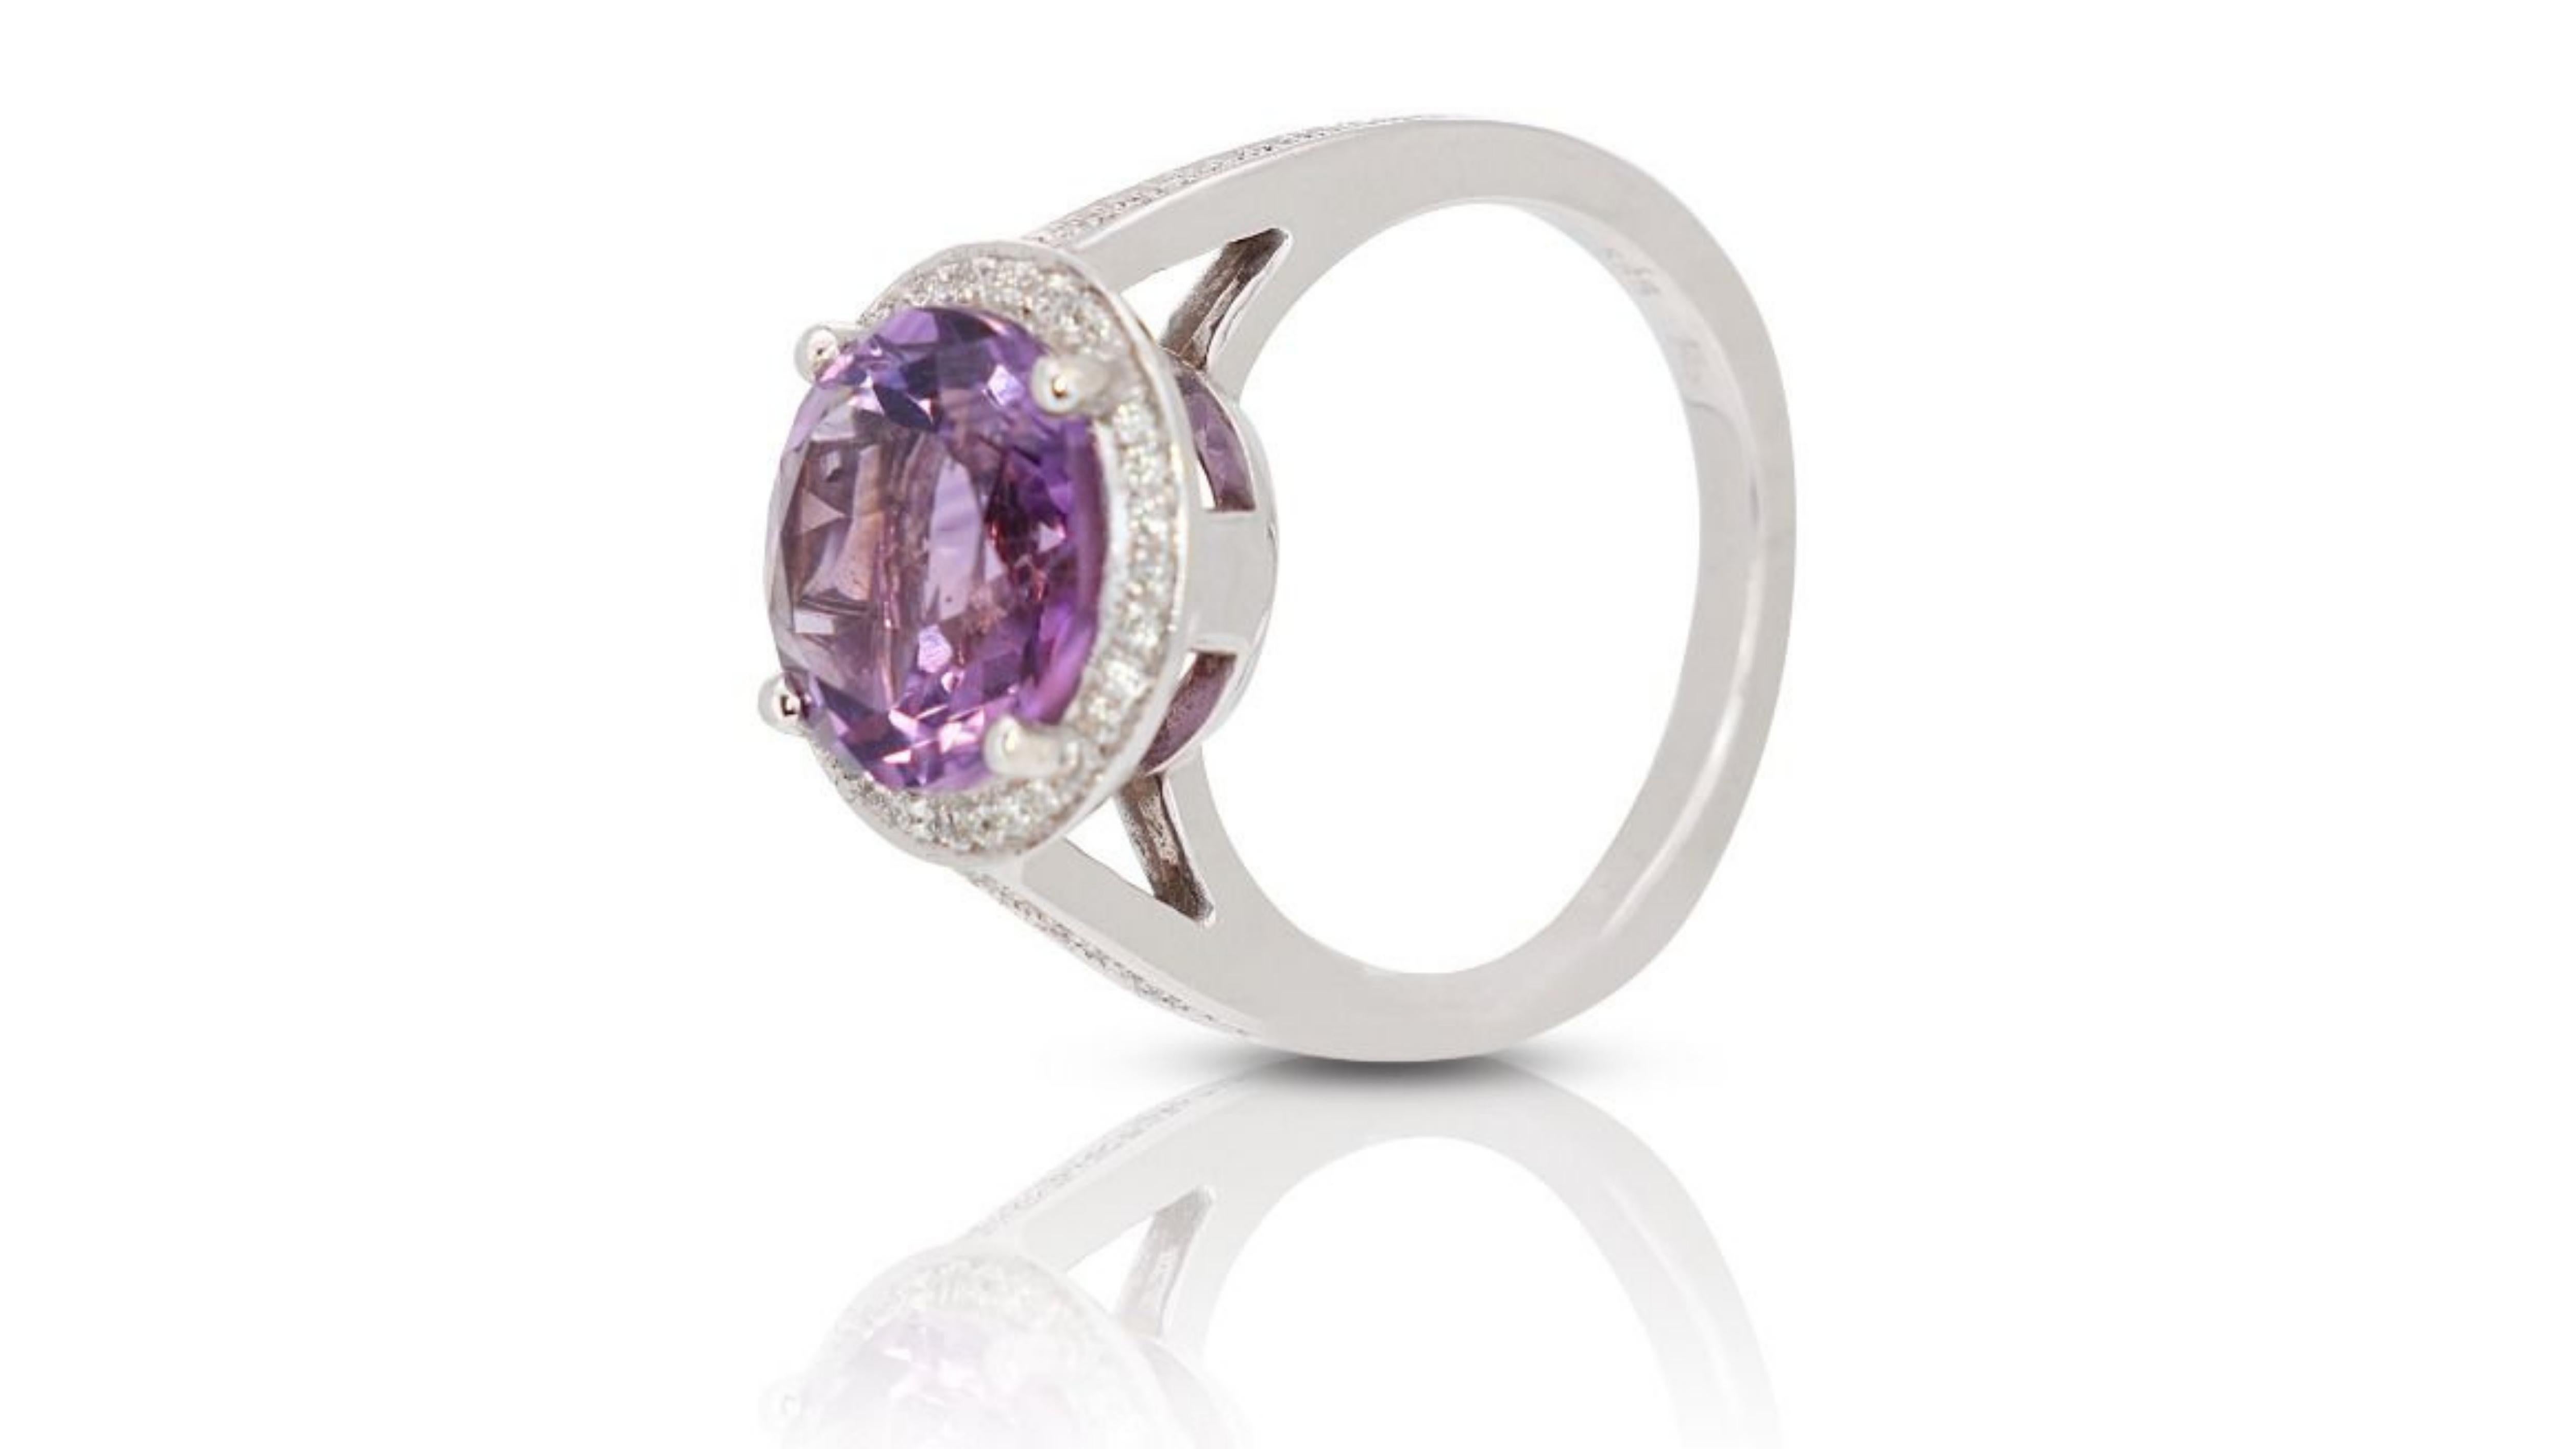 Glamorous 18k White Gold Ring 3.52ct. Round Brilliant Pave Amethyst Ring For Sale 2